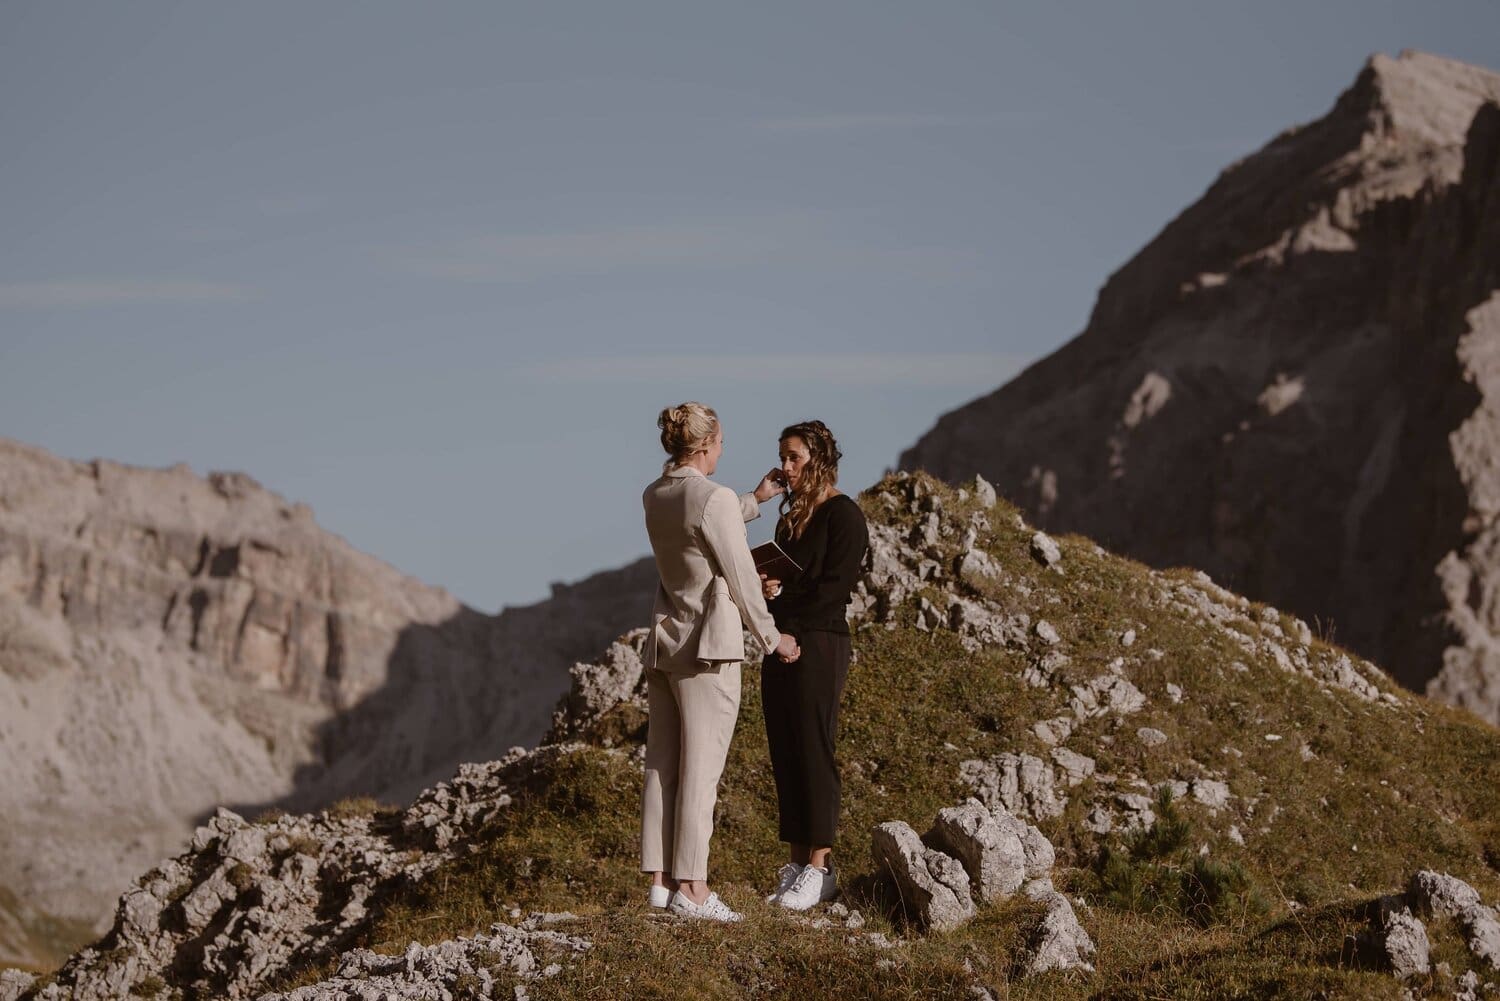 Two brides reading vows during their wedding ceremony in the Italian Dolomites.